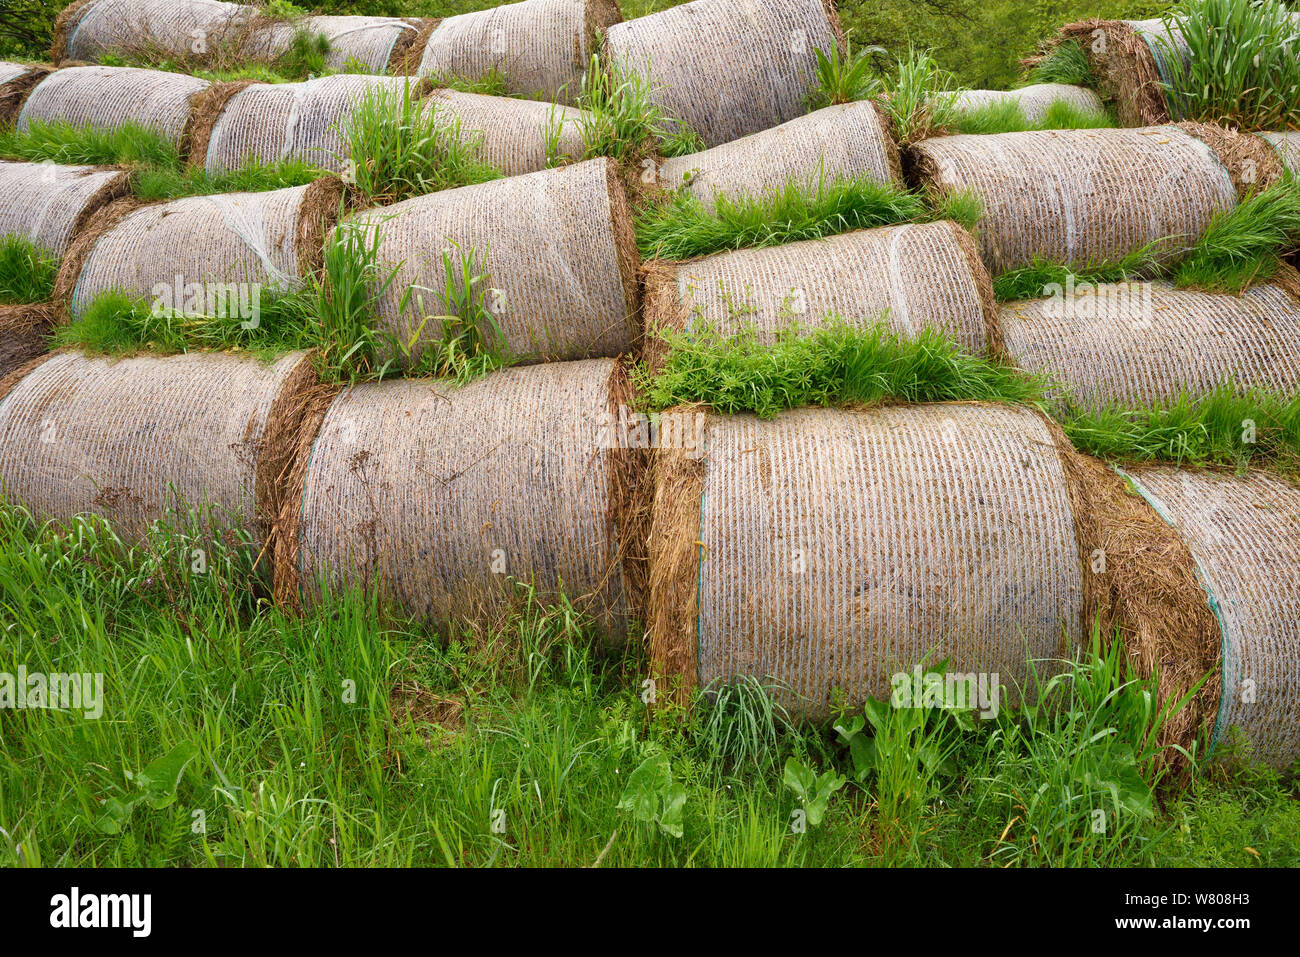 Hay bales, lying abandoned, grown and harvested beacuse of EU subsidies, but without buyers, Nemunas River Delta, Lithuania. May 2015. Stock Photo